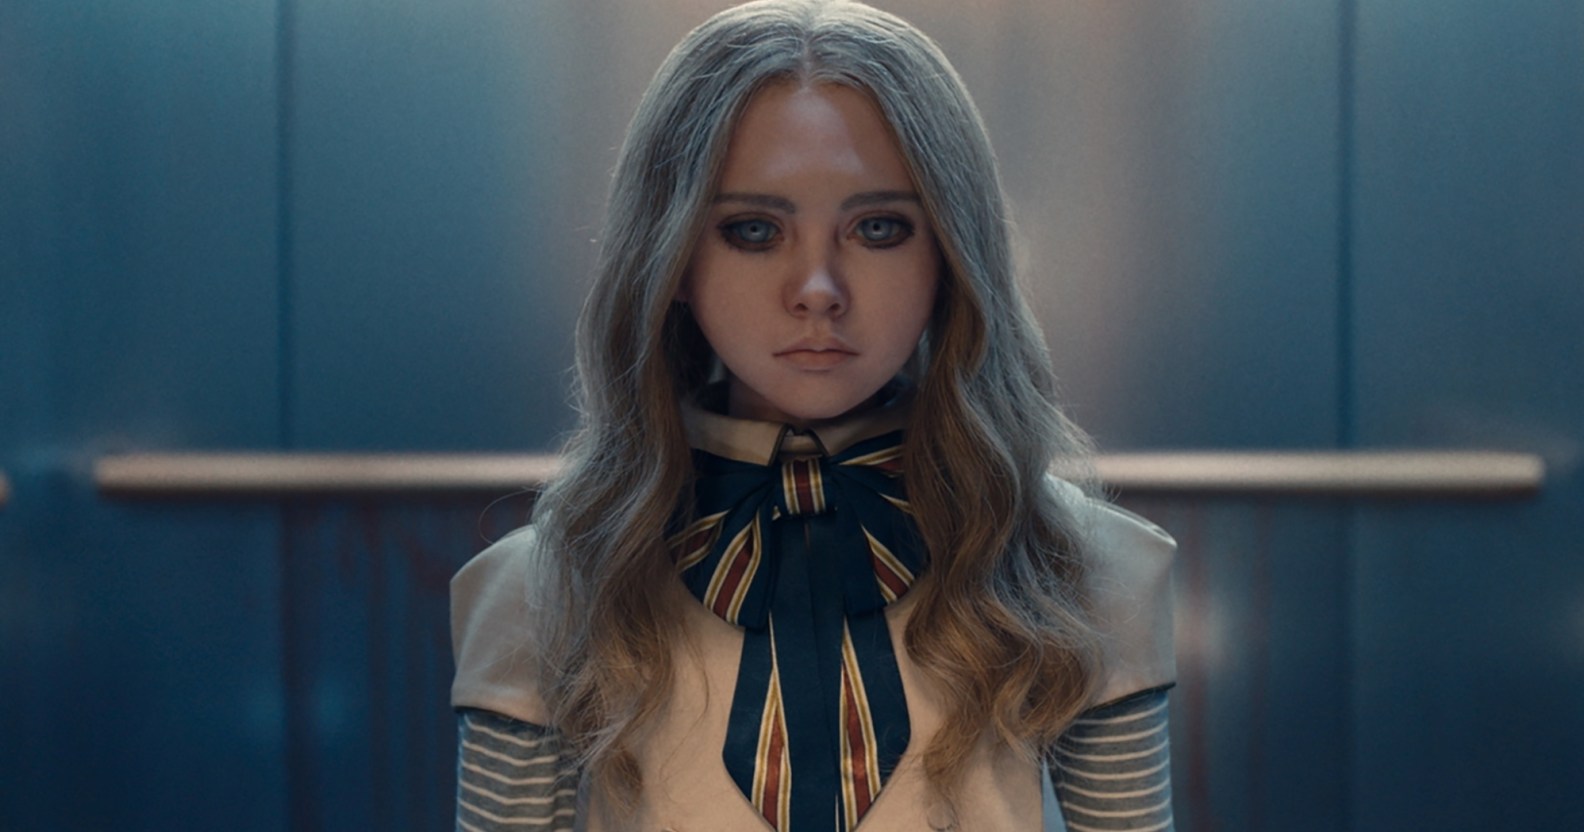 A still from the movie M3GAN showing the robot doll wearing a white and blue-striped outfit standing in an elevator